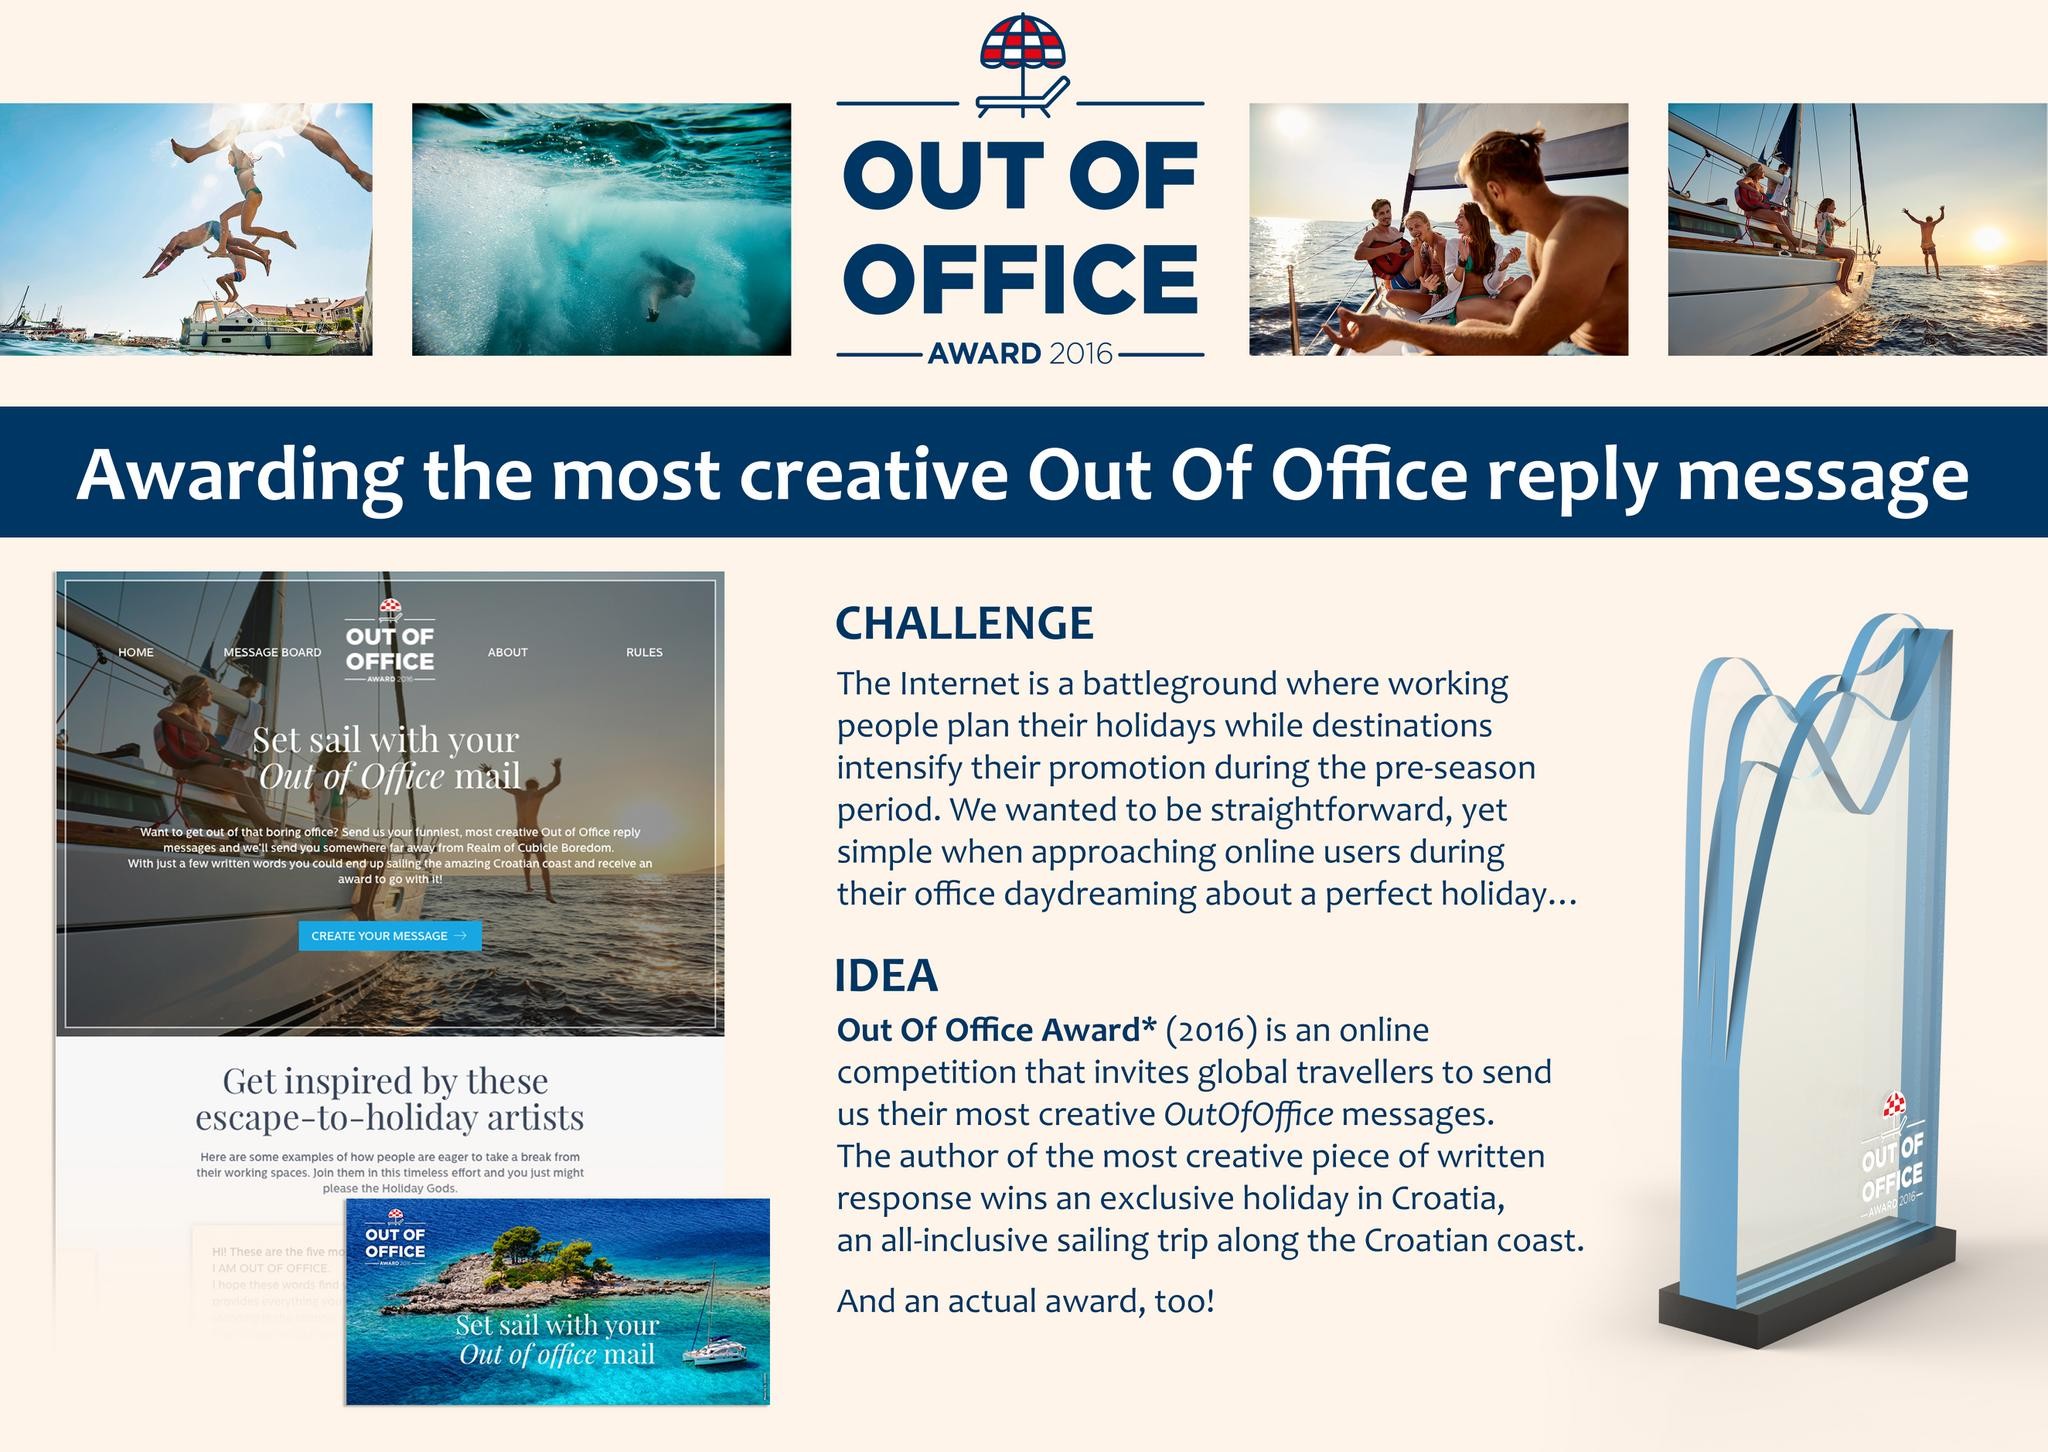 Out Of Office Award